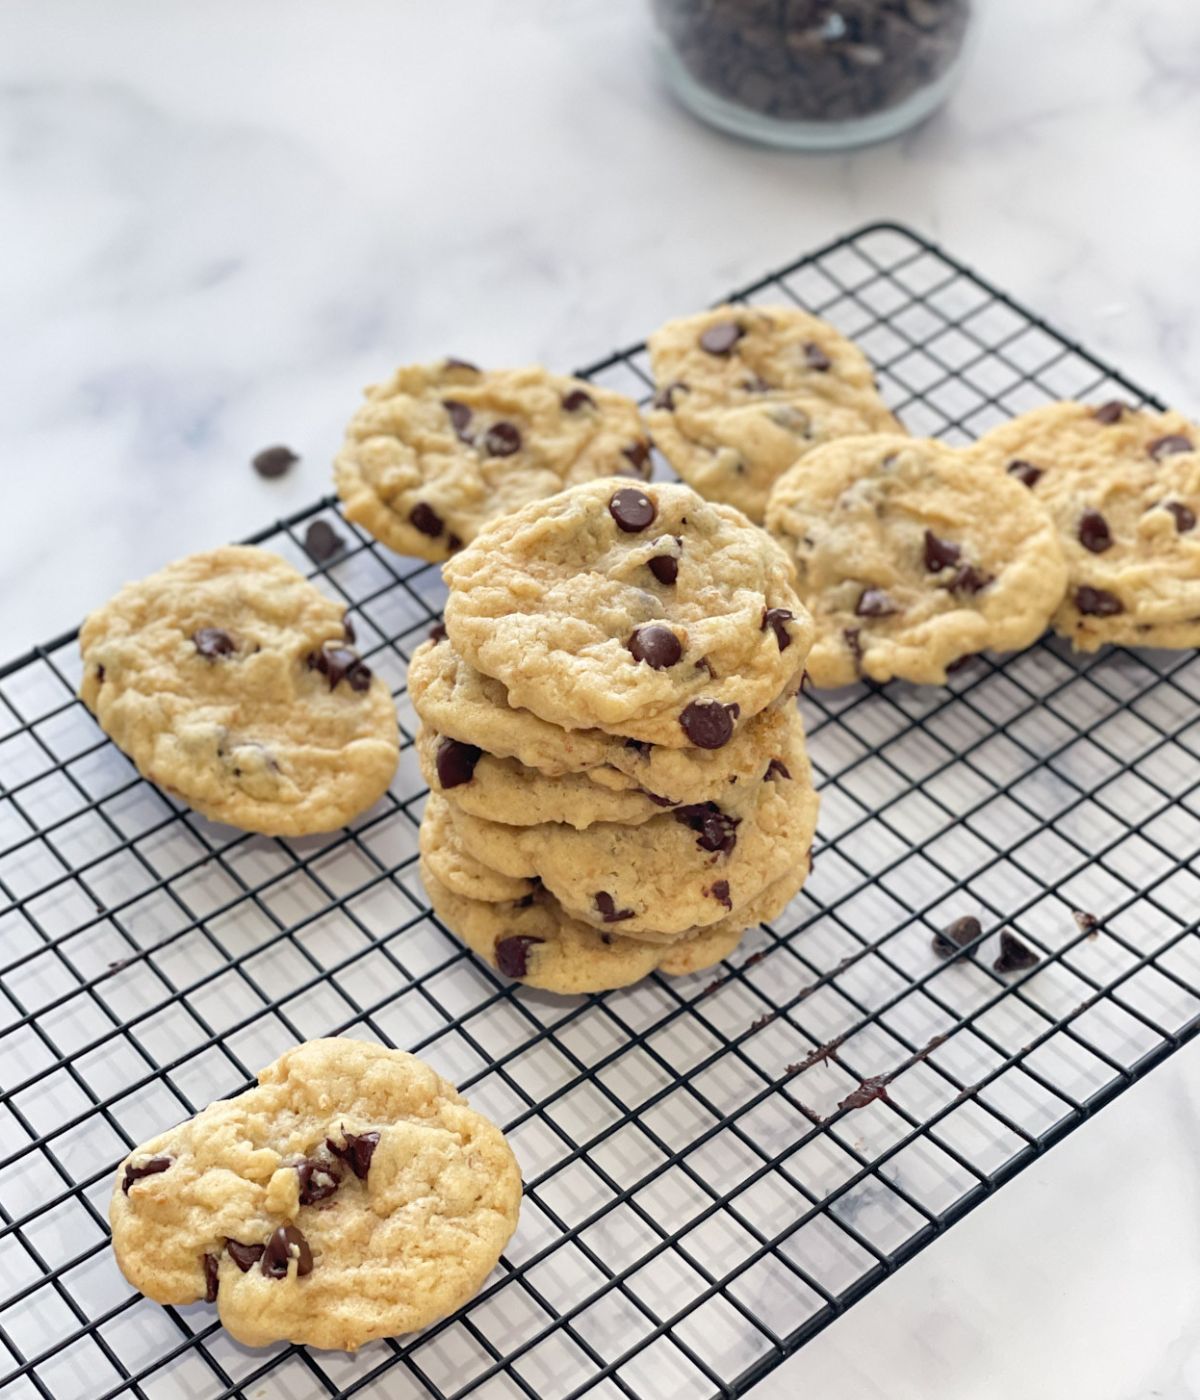 stack of chocolate chip cookies are on the rack.